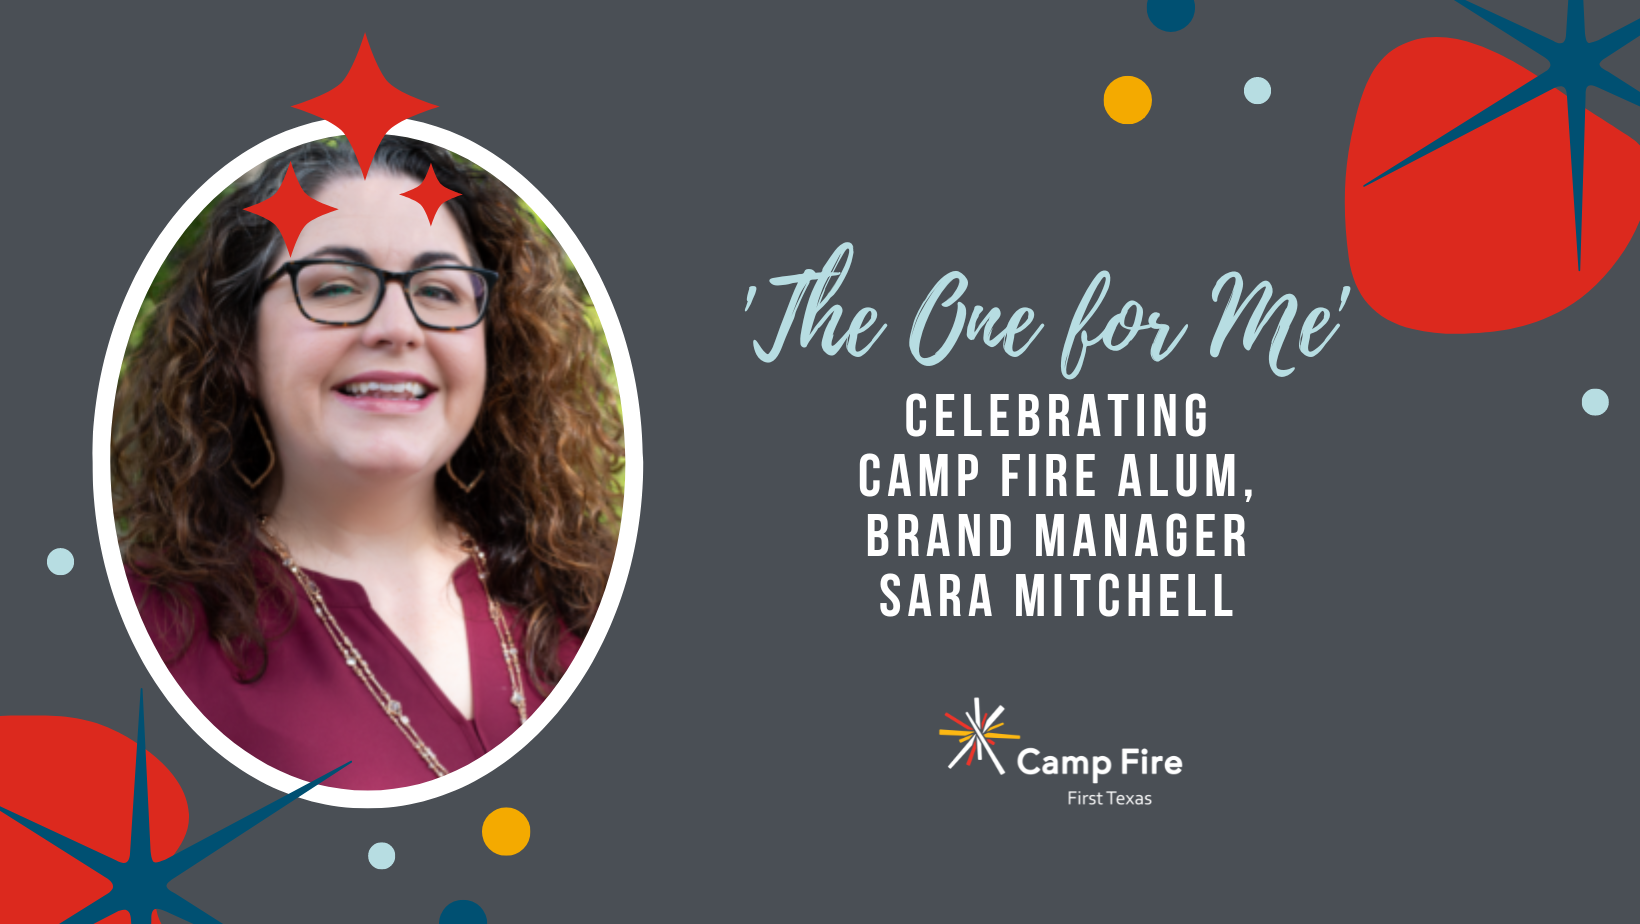 'The One for Me' - Celebrating Camp Fire Alum, Brand Manager Sara Mitchell, a Camp Fire First Texas blog